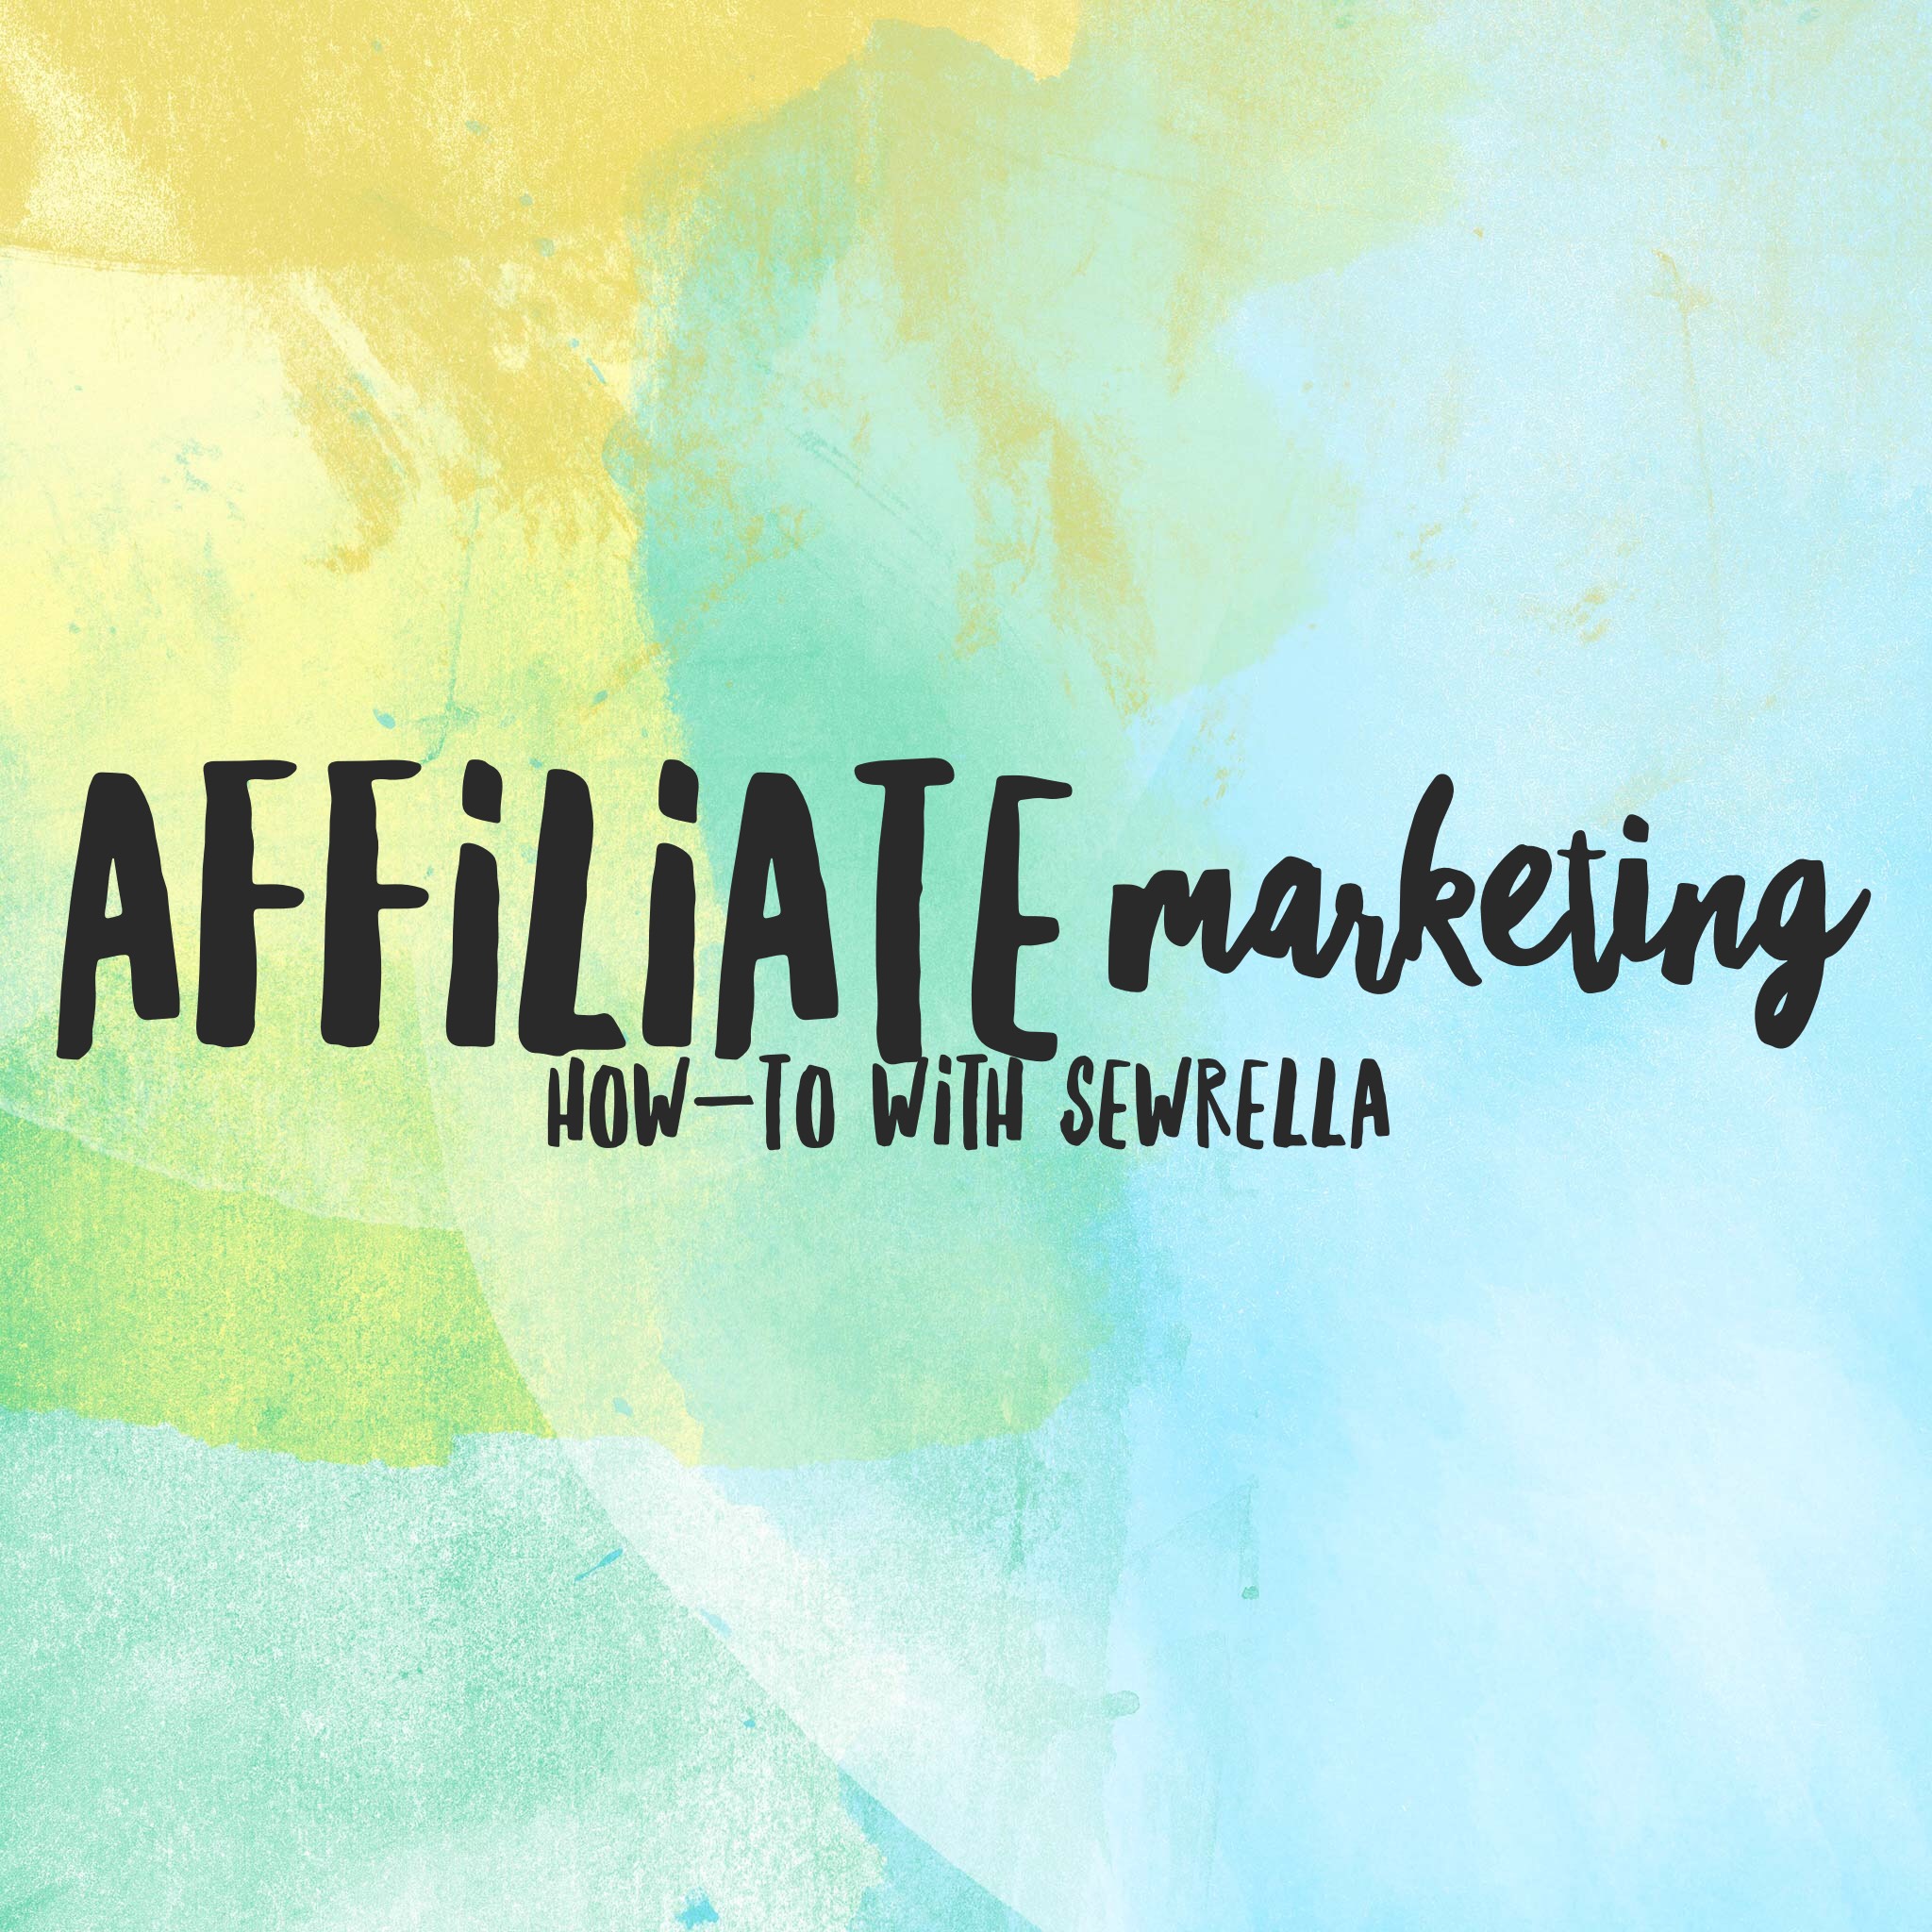 Lion Brand Yarn’s Affiliate Marketing Program: A How-To Mini Course